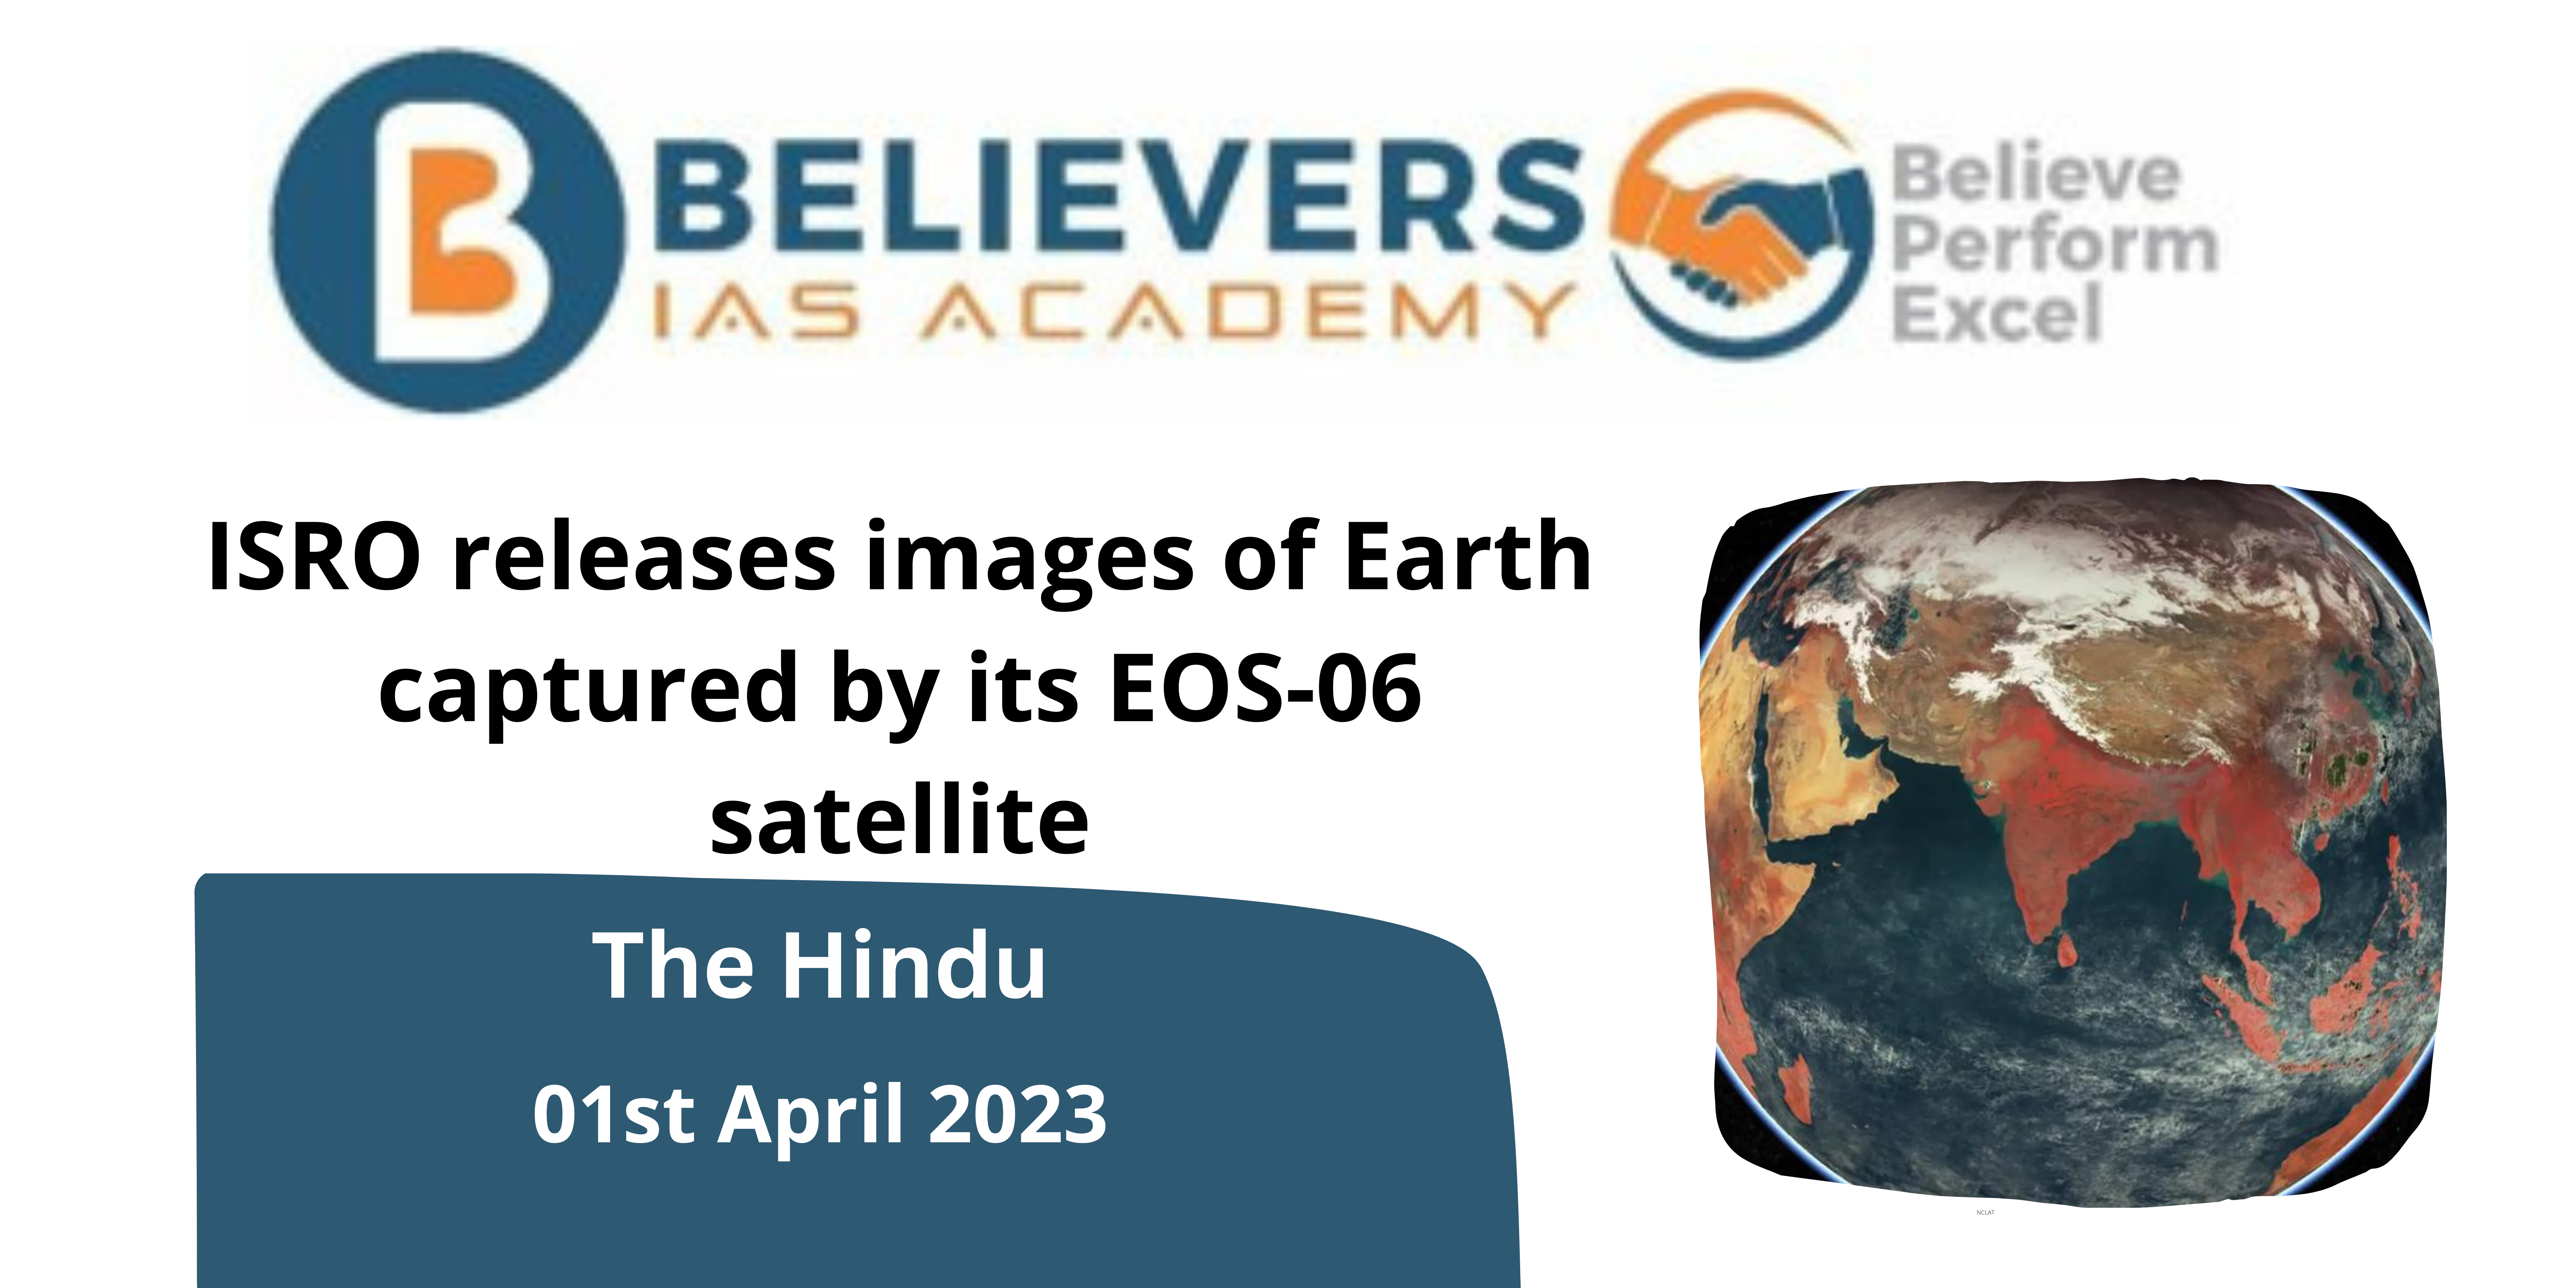 ISRO releases images of Earth captured by its EOS-06 satellite